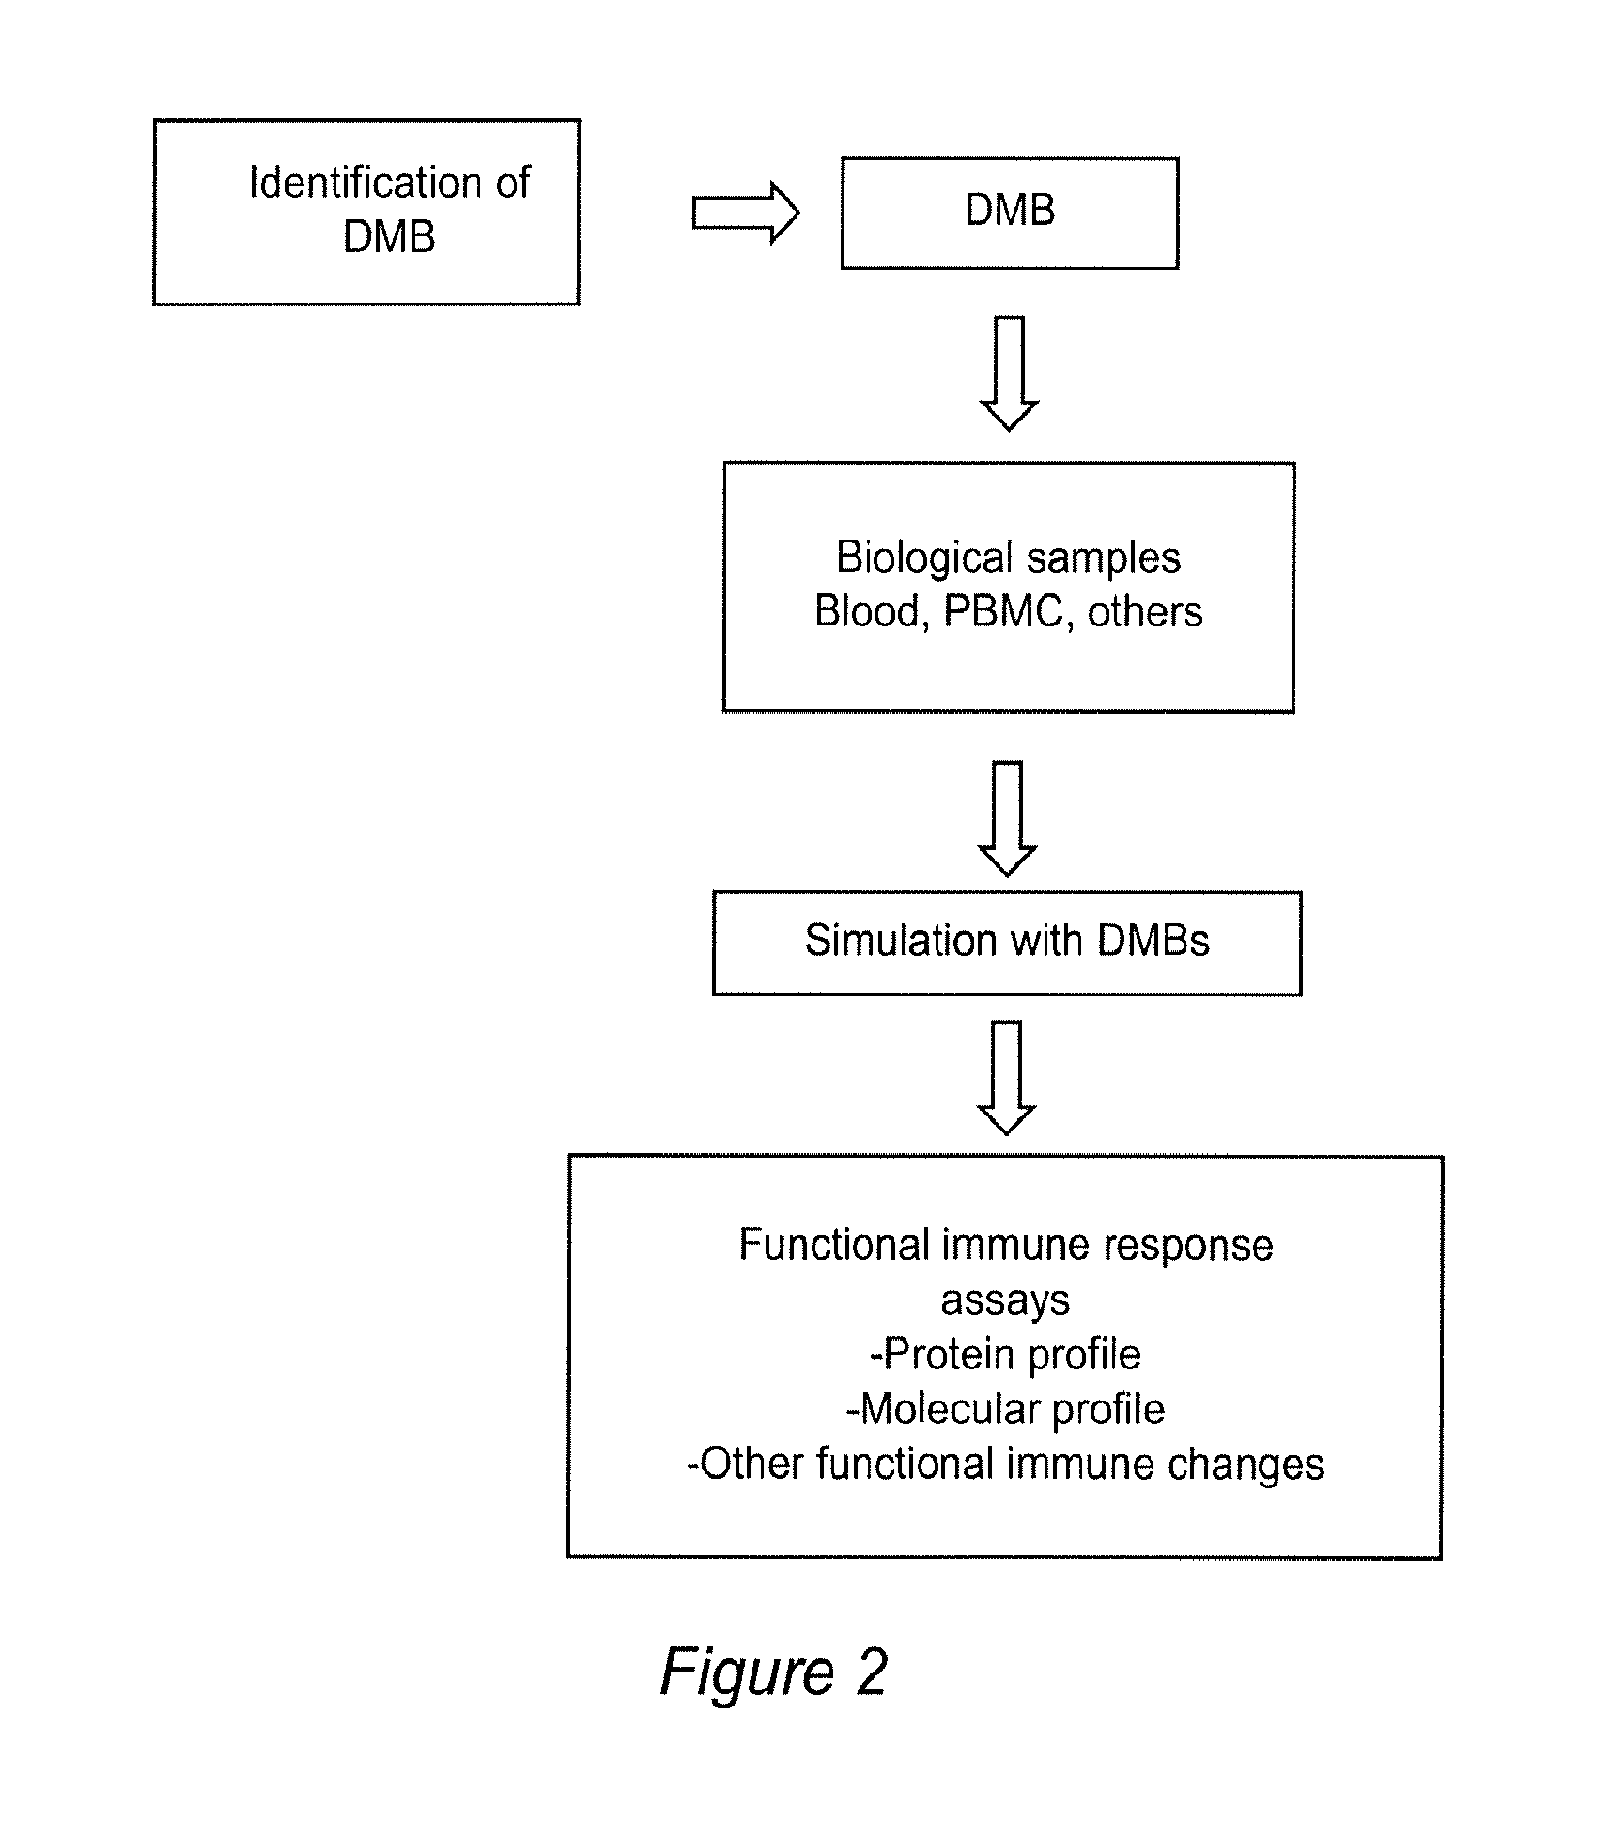 Methods for diagnosing and monitoring diseases or conditions using disease modified biomolecules and measurement of a functional immune response